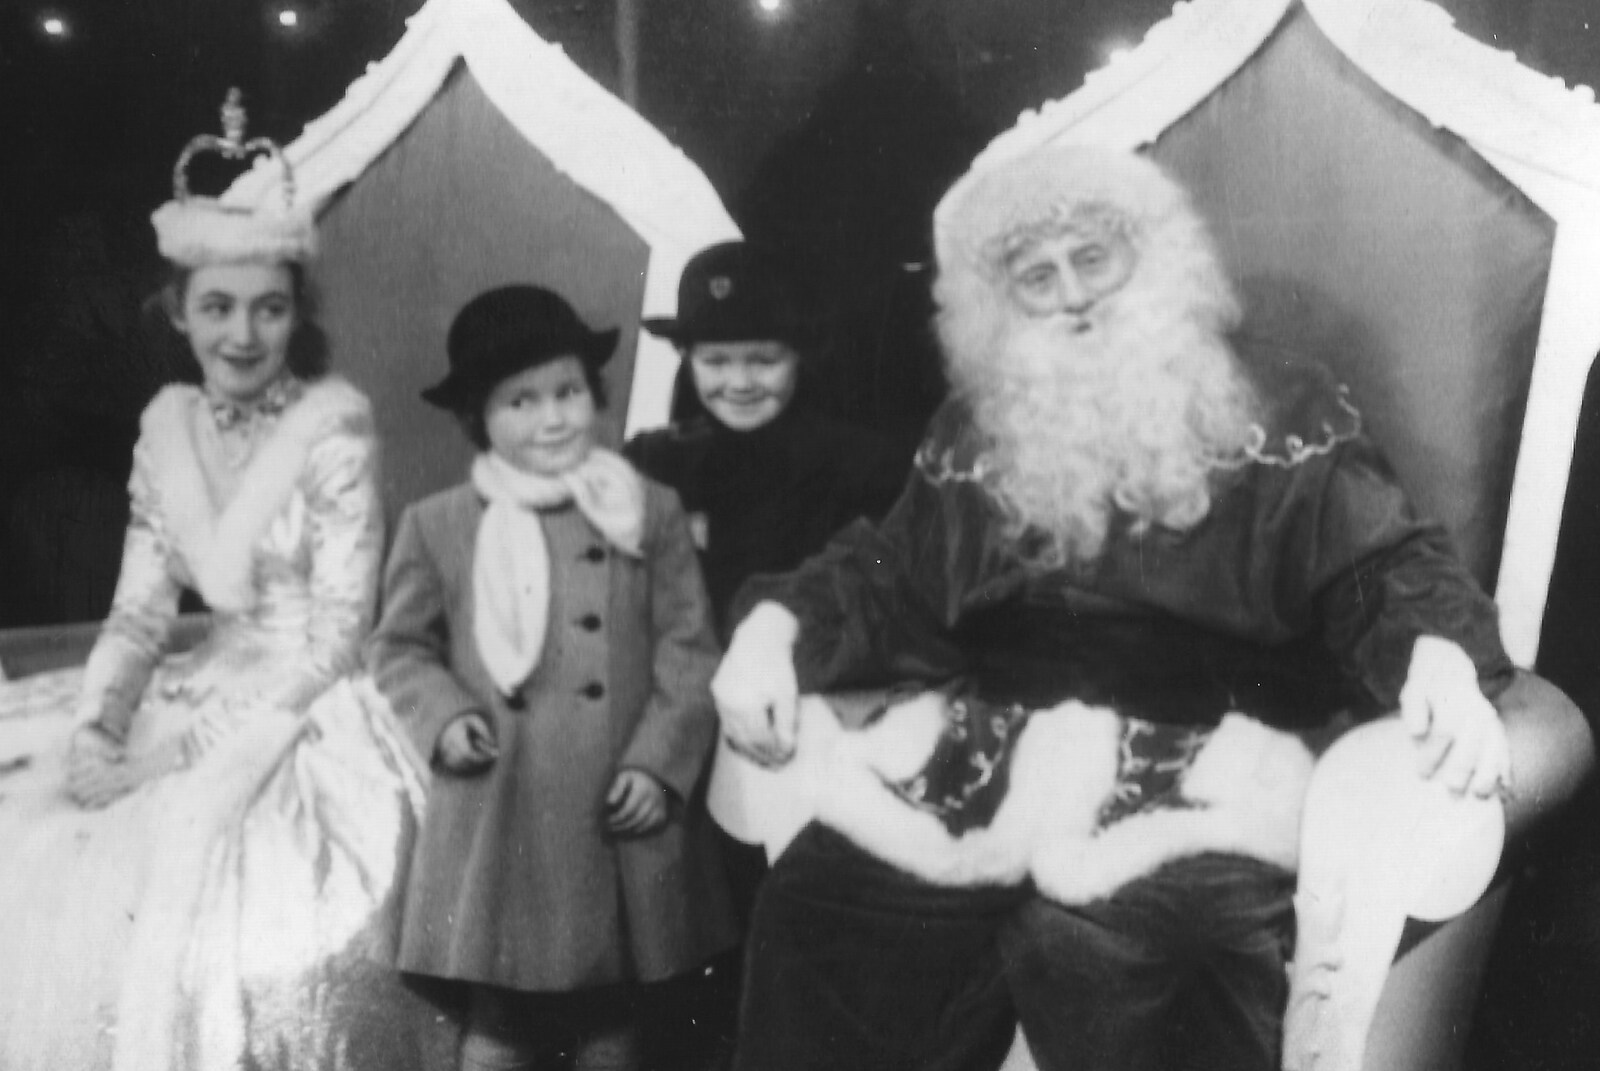 Family History: The 1940s and 1950s - 24th January 2020: Janet and Judith visit Santa